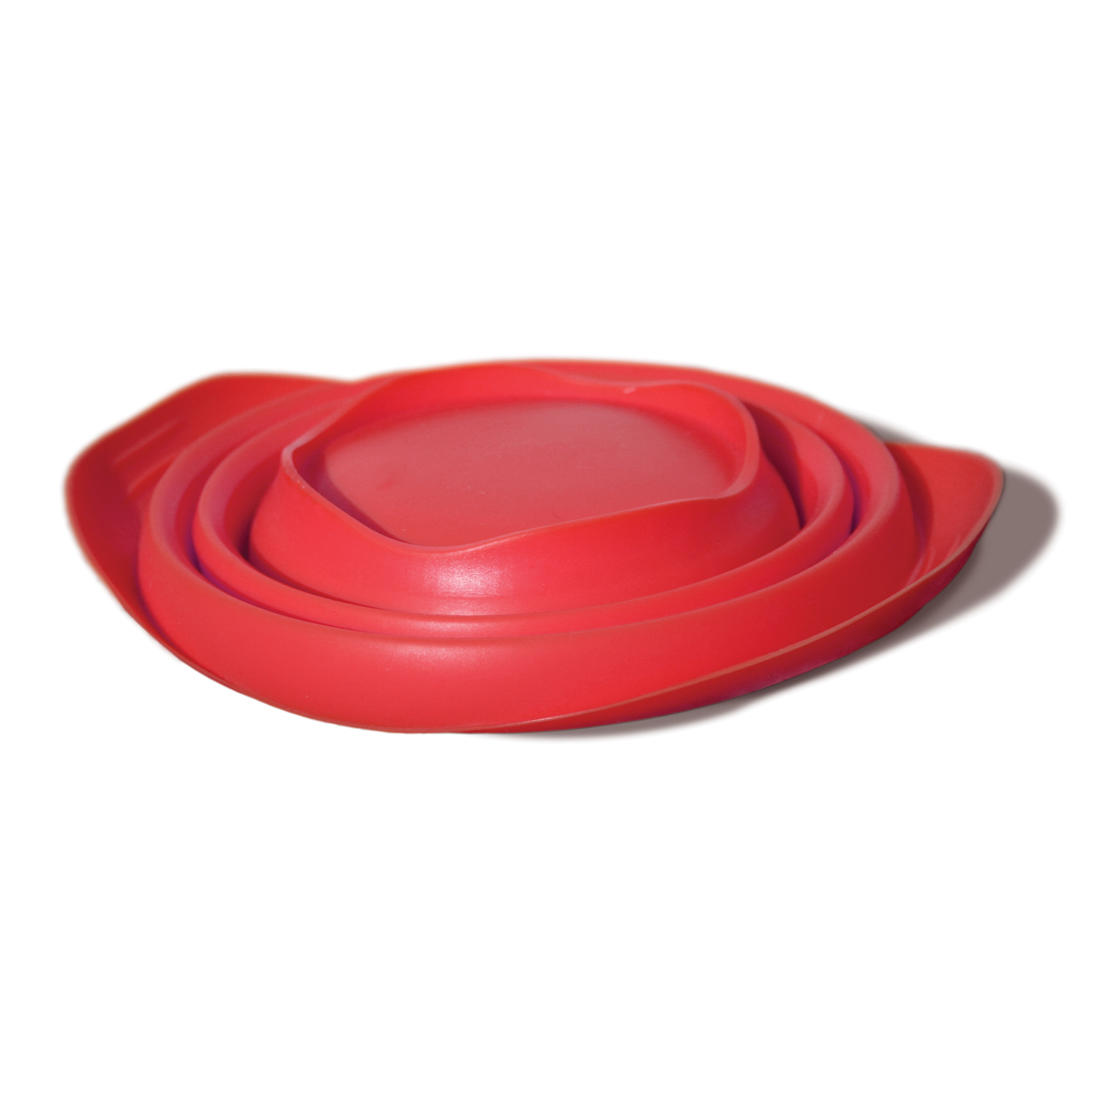 Kurgo collaps-a-bowl red collapsed